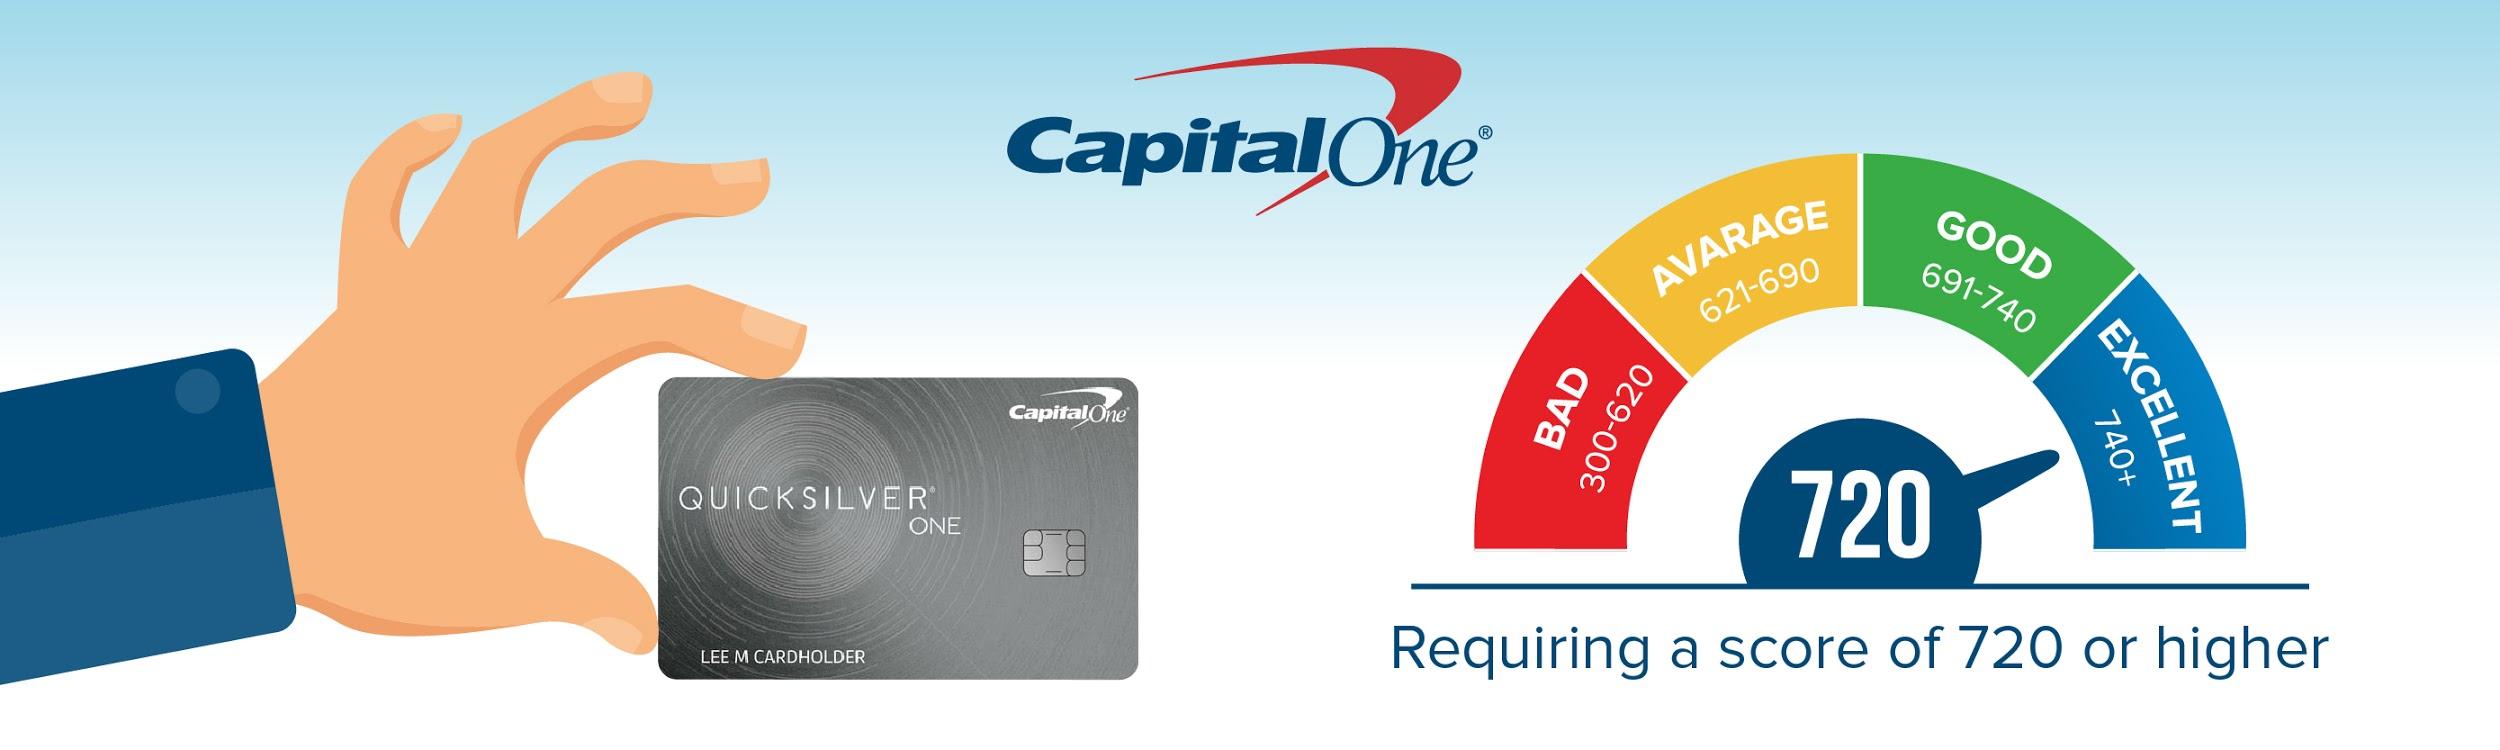 Balance Transfer Cards from Capital One - CreditLoan.com®